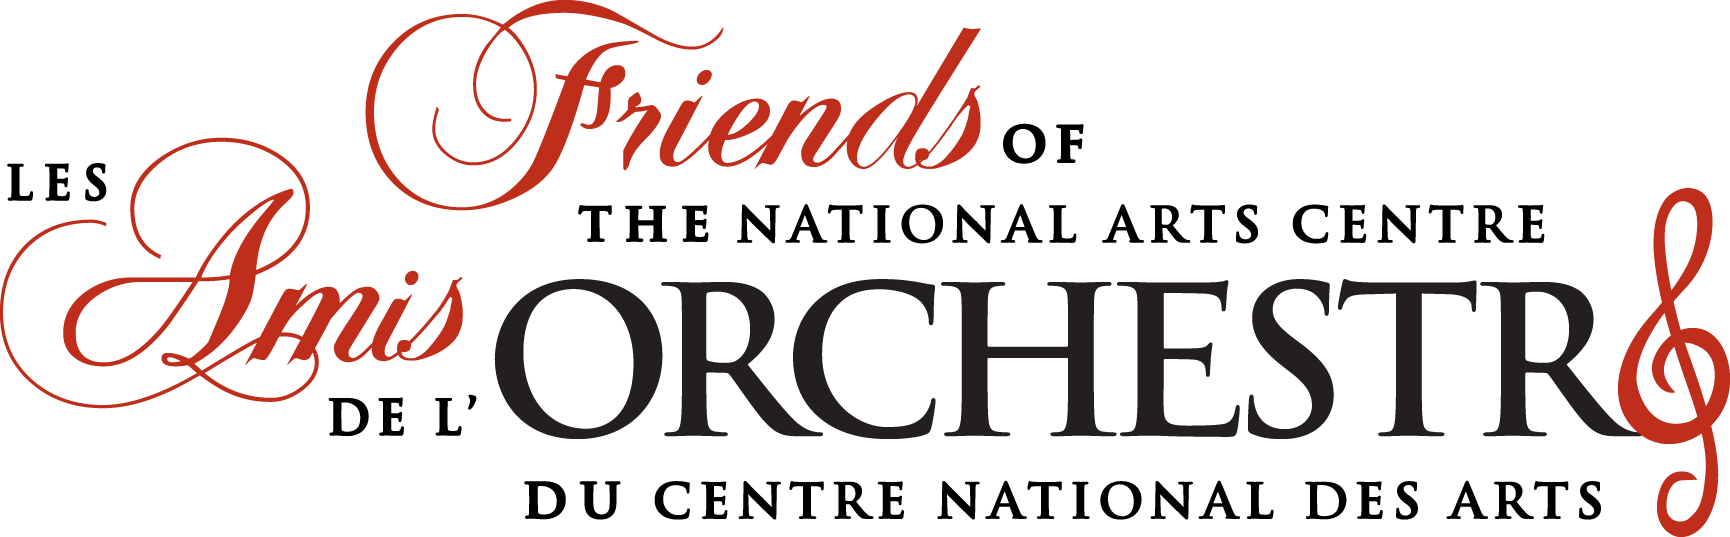 Friends of the National Arts Centre Orchestra